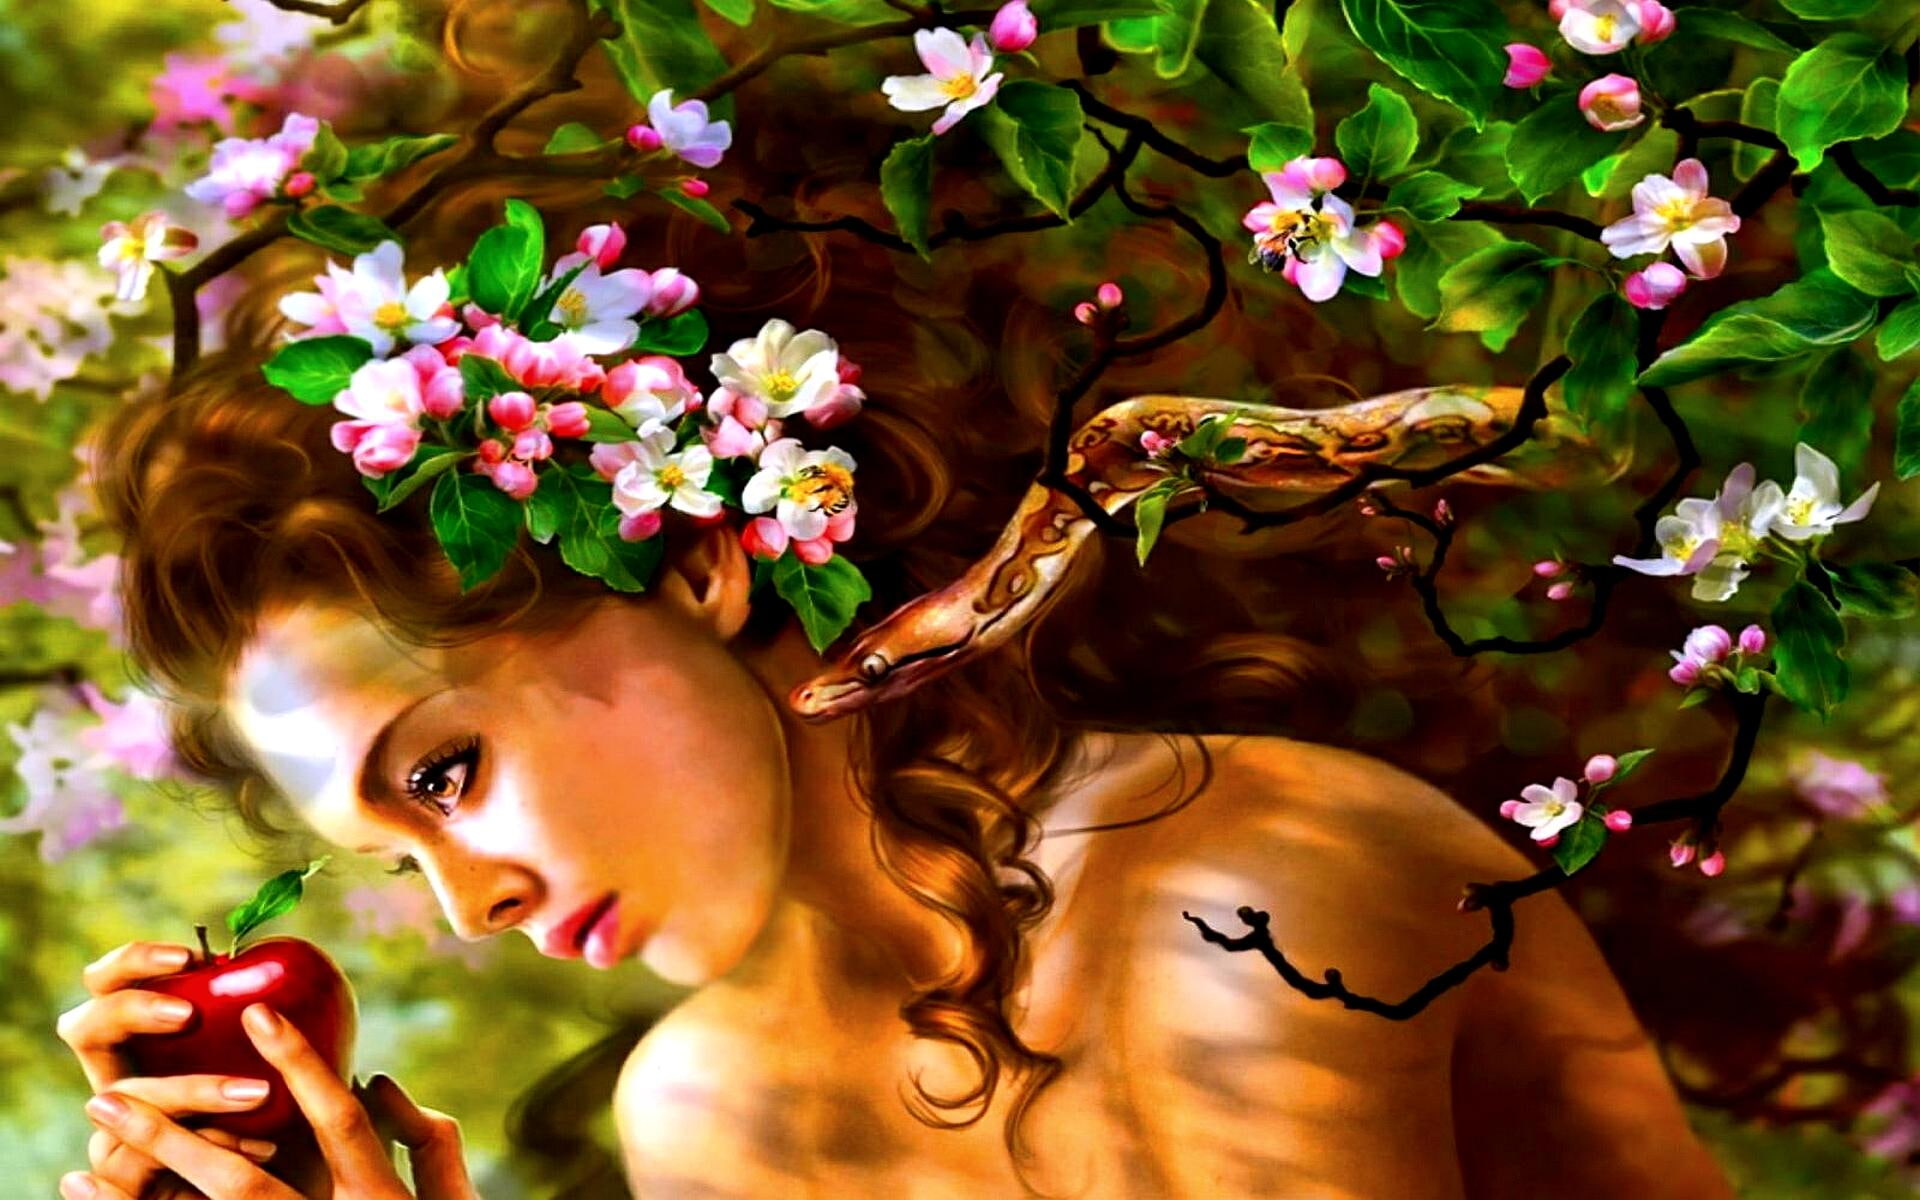 Mysterious Beauty, brown haired woman holding apple illustrationb